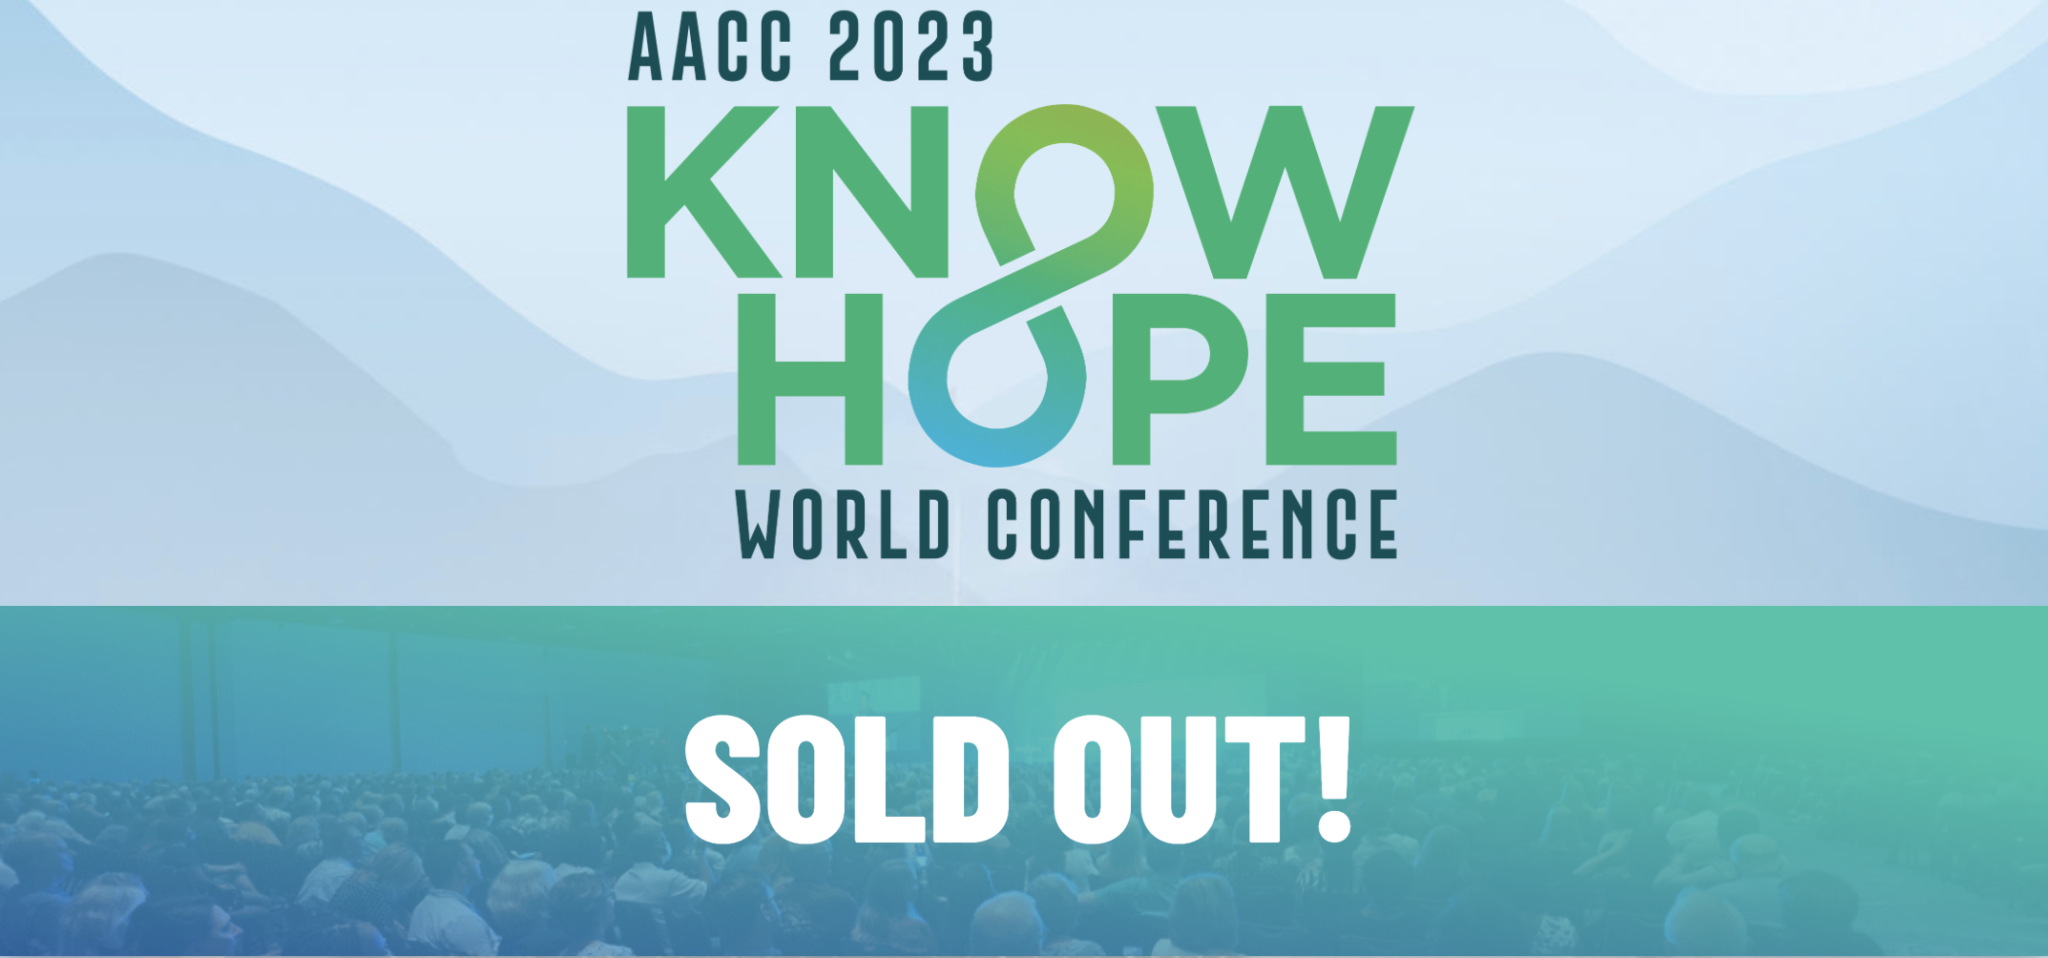 AACC World Conference Sold Out! AACC